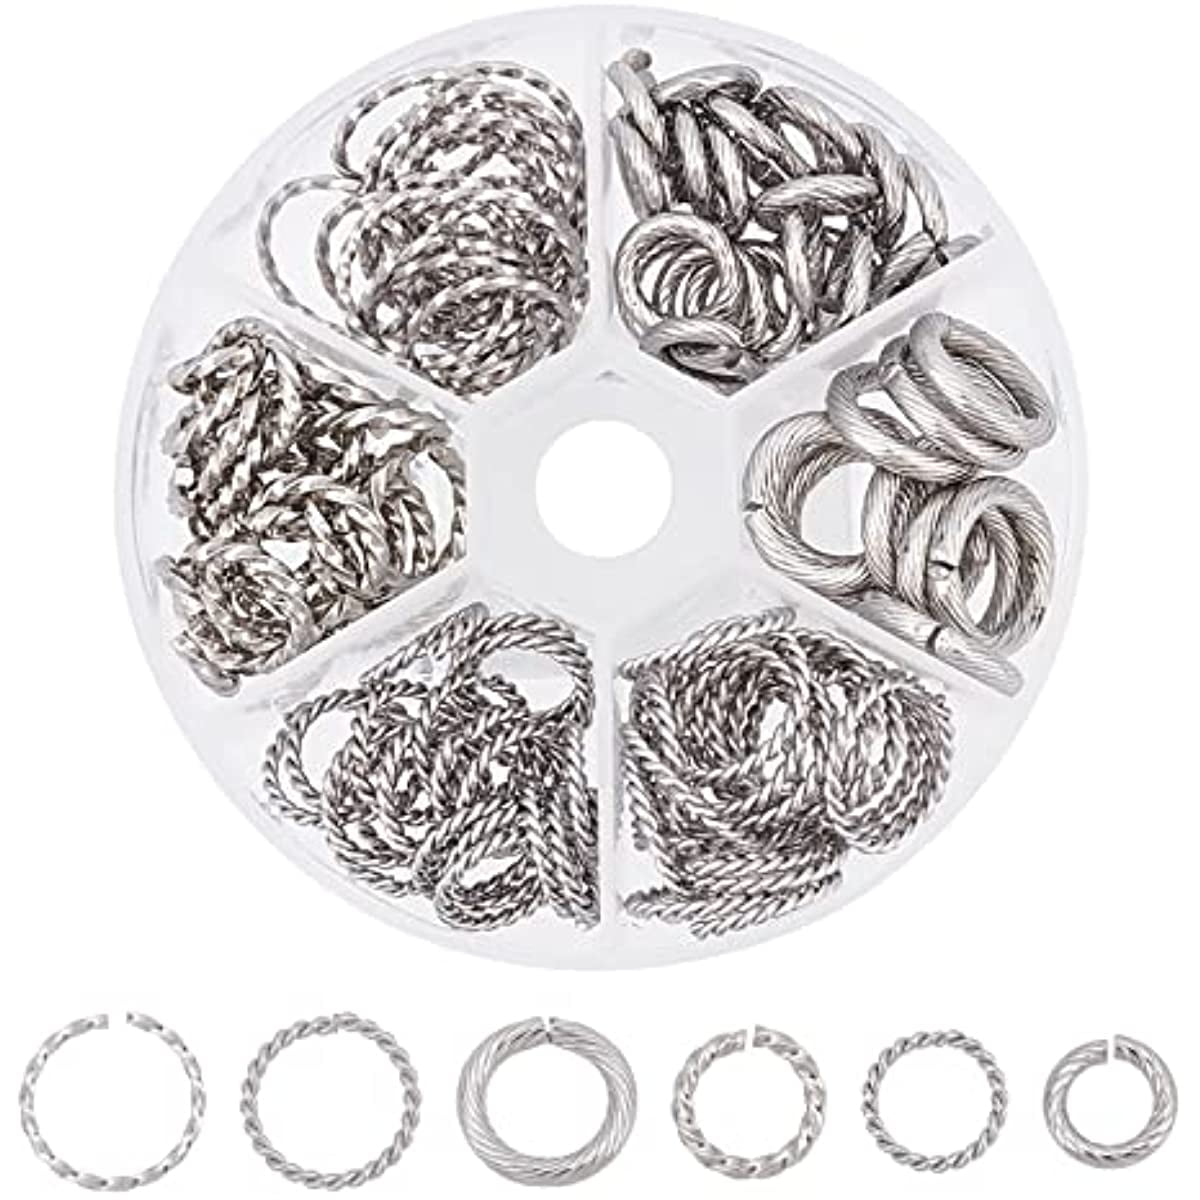 100 pcs 304 Stainless Steel Silver Open Jump Rings 7mm – 18 Gauge (1mm  Thick)